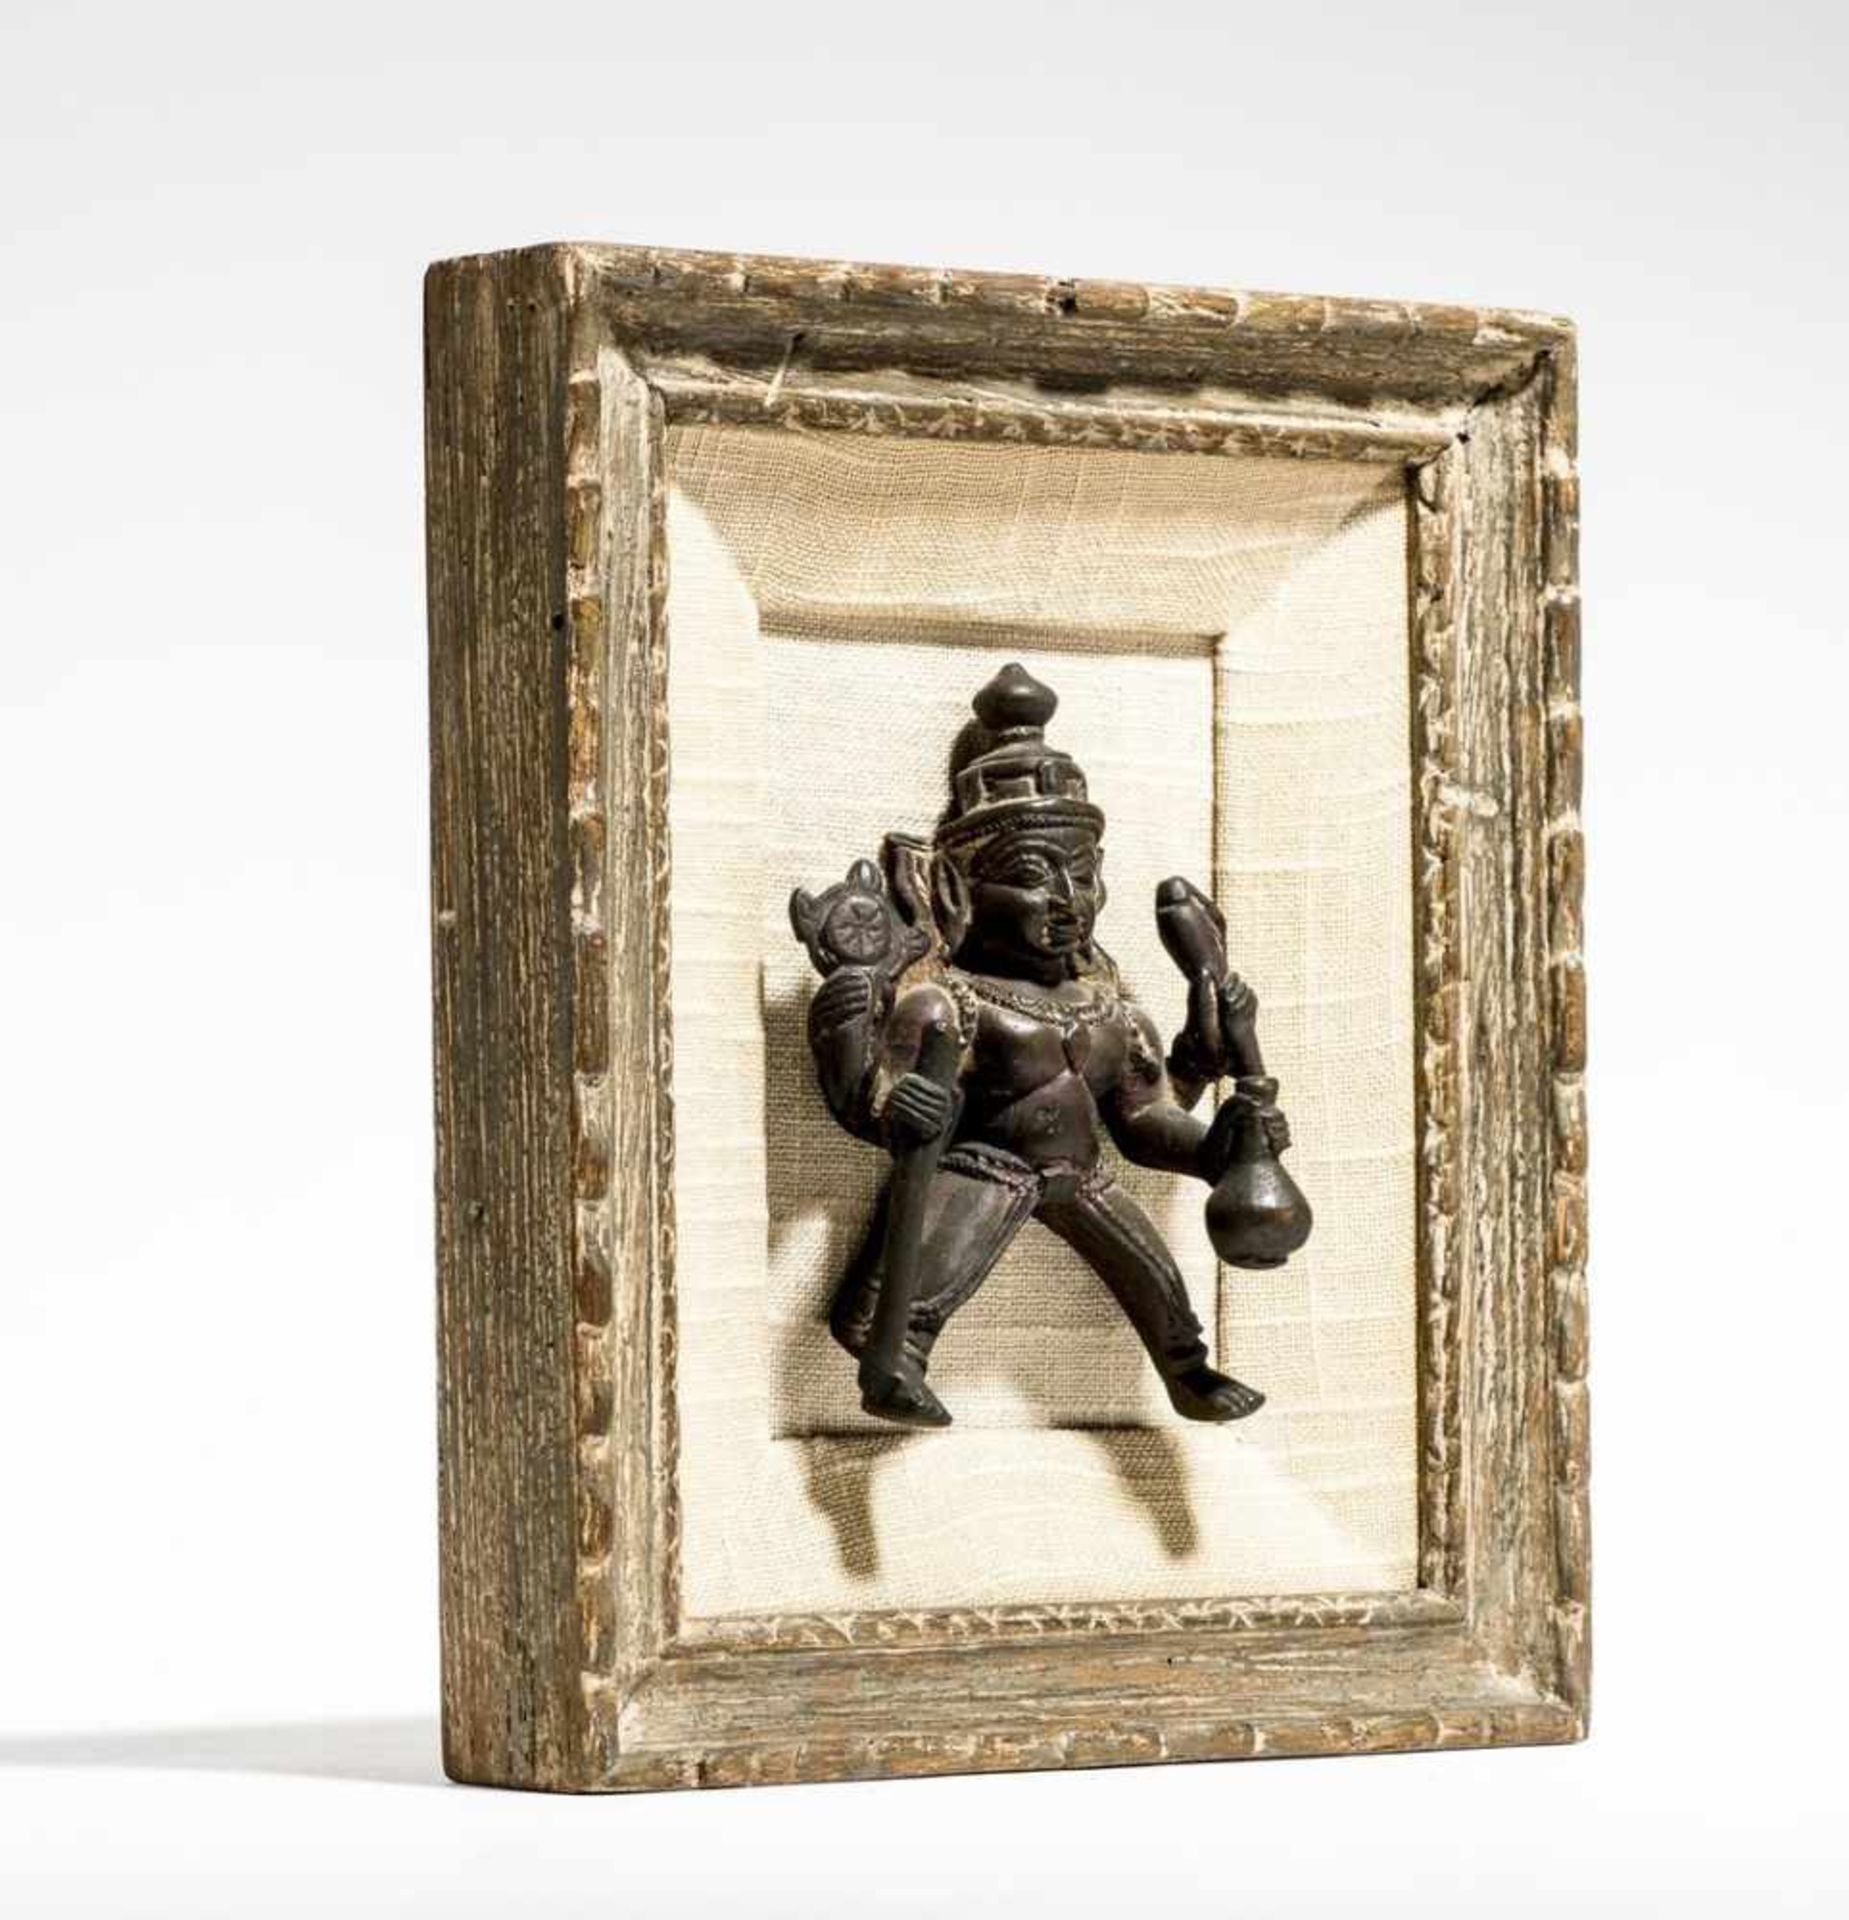 GOD VISHNU Bronze. India, approx. 18th to 19th cent. Small cult bronze, neatly affixed within a - Image 2 of 3